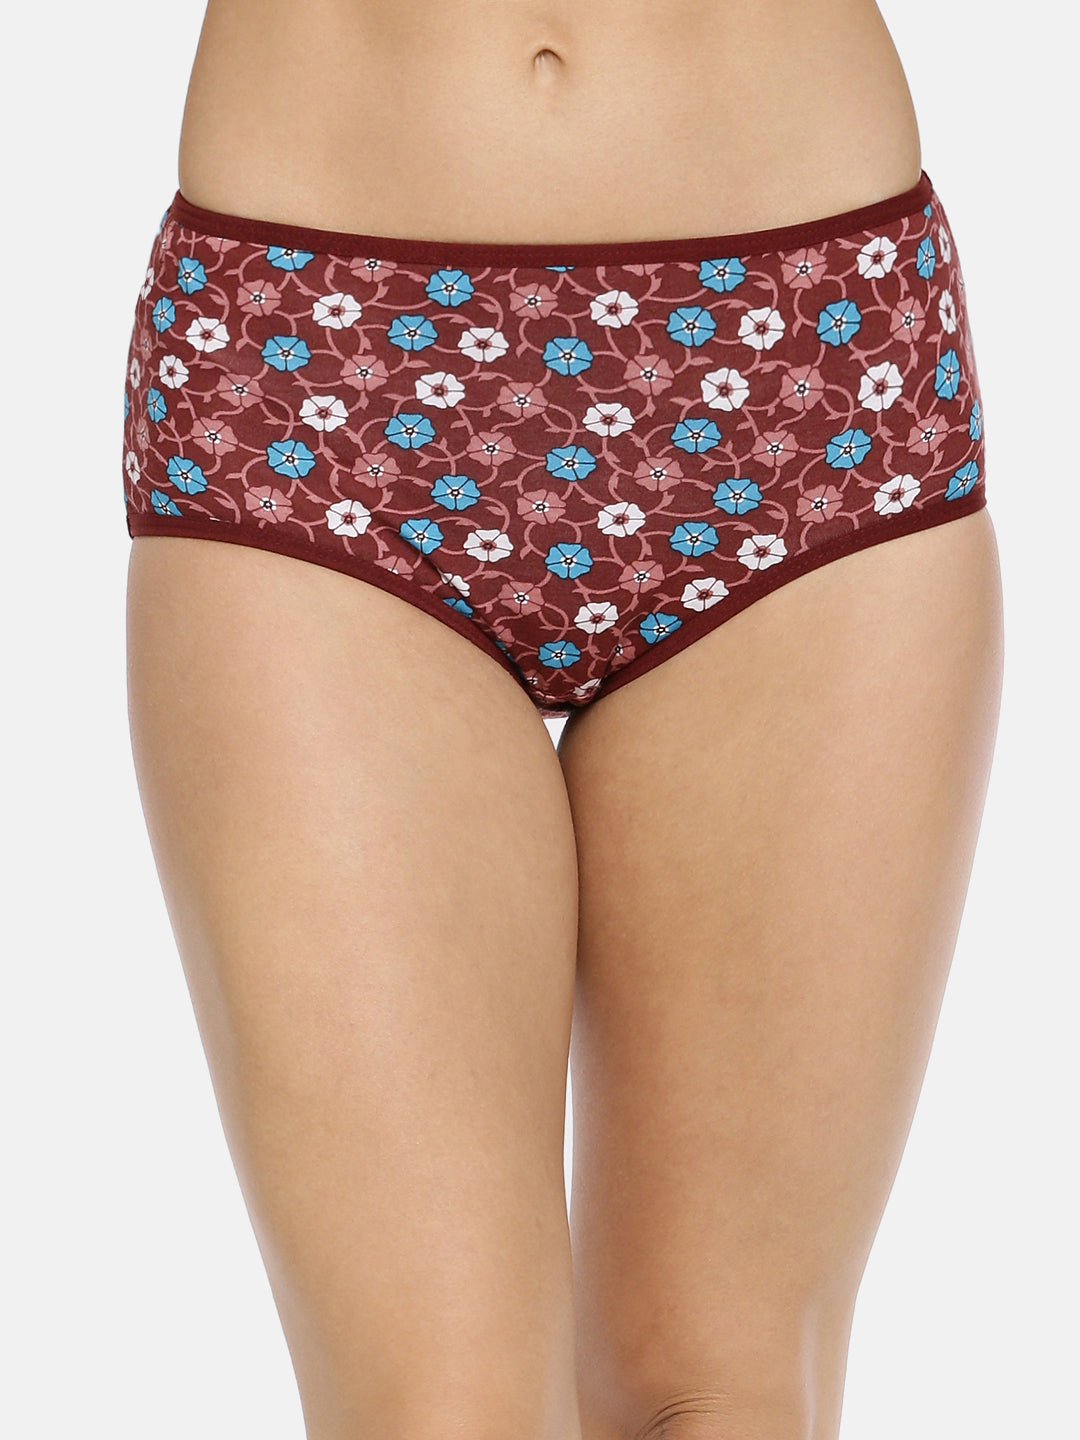 Red Rose Intima Cotton Medium Rise, Full Coverage Hipster Panties - Multicolor Pack of 3